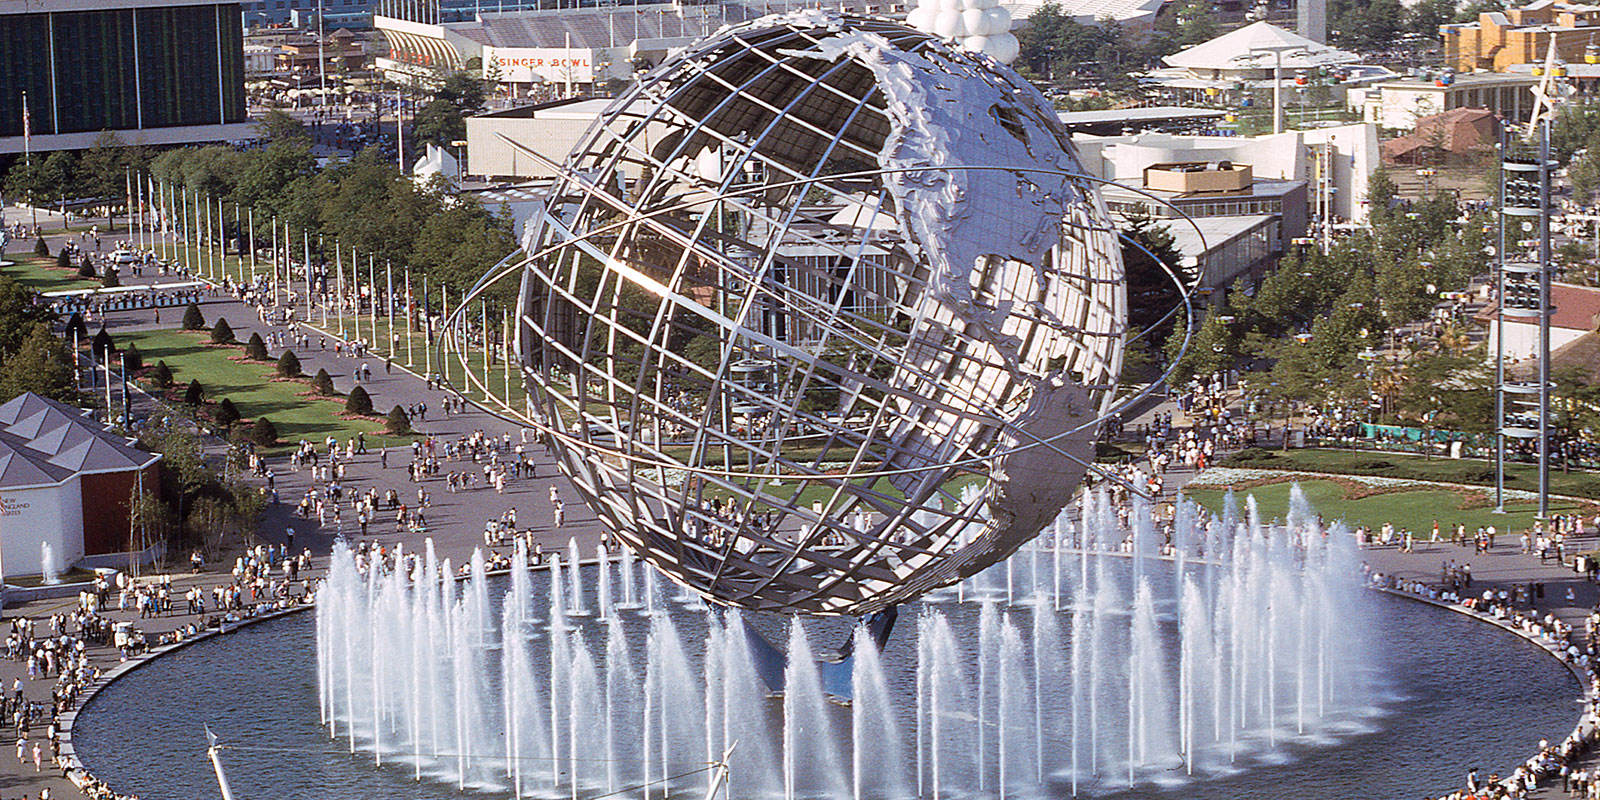 The Unisphere during the 1964 World's Fair in Flushing Meadows Corona Park Queens (Jerry Coli/Dreamstime)